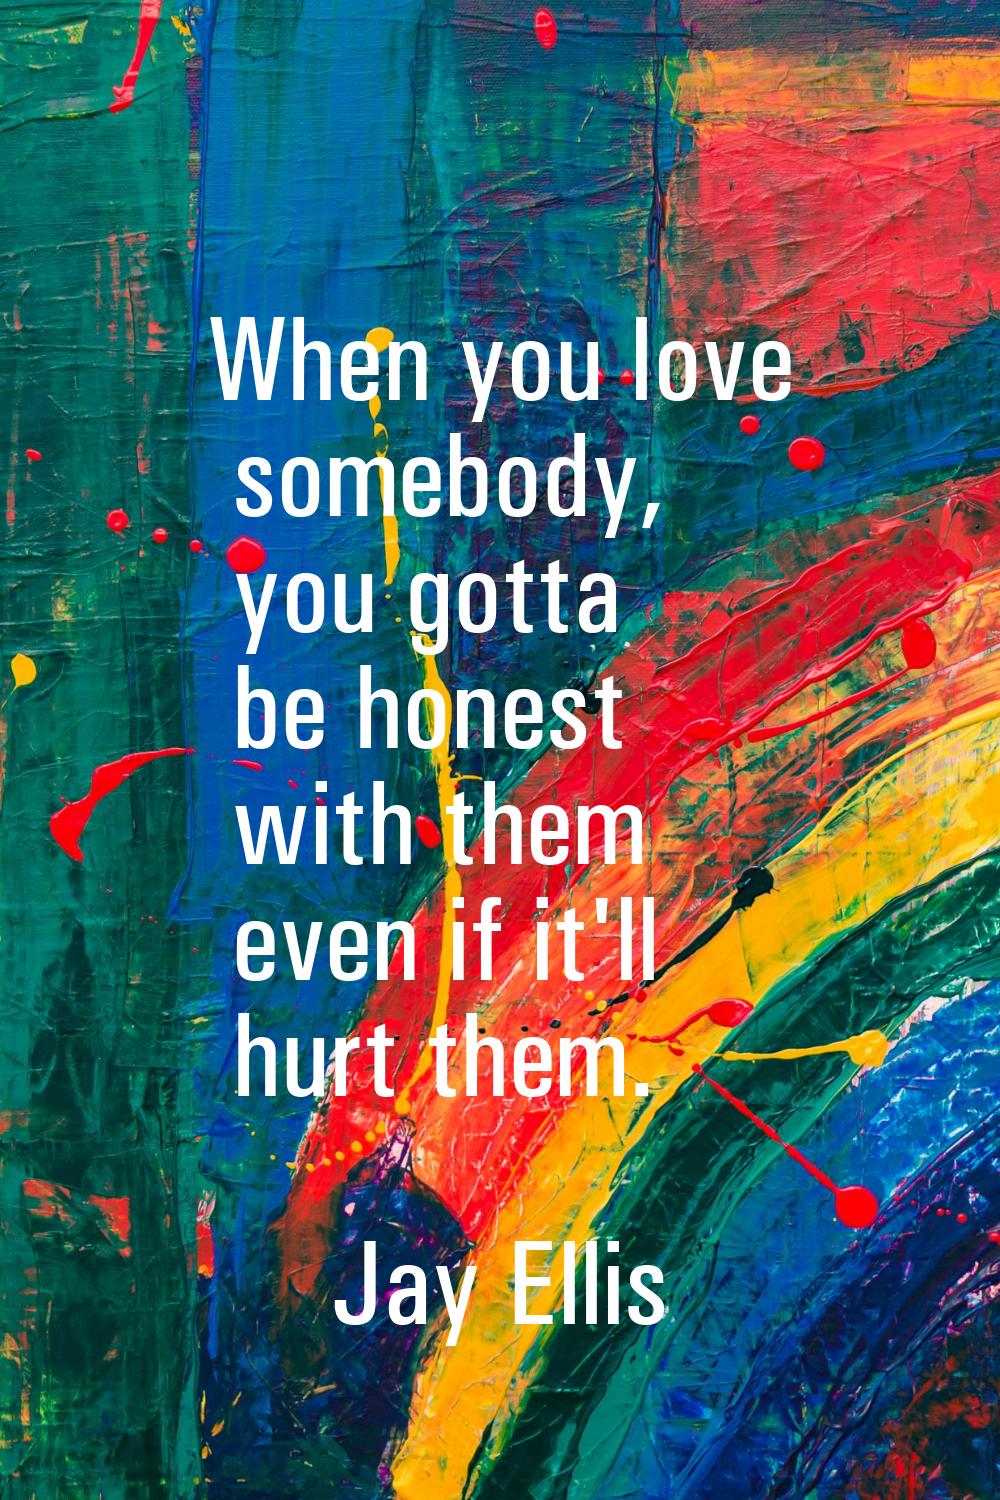 When you love somebody, you gotta be honest with them even if it'll hurt them.